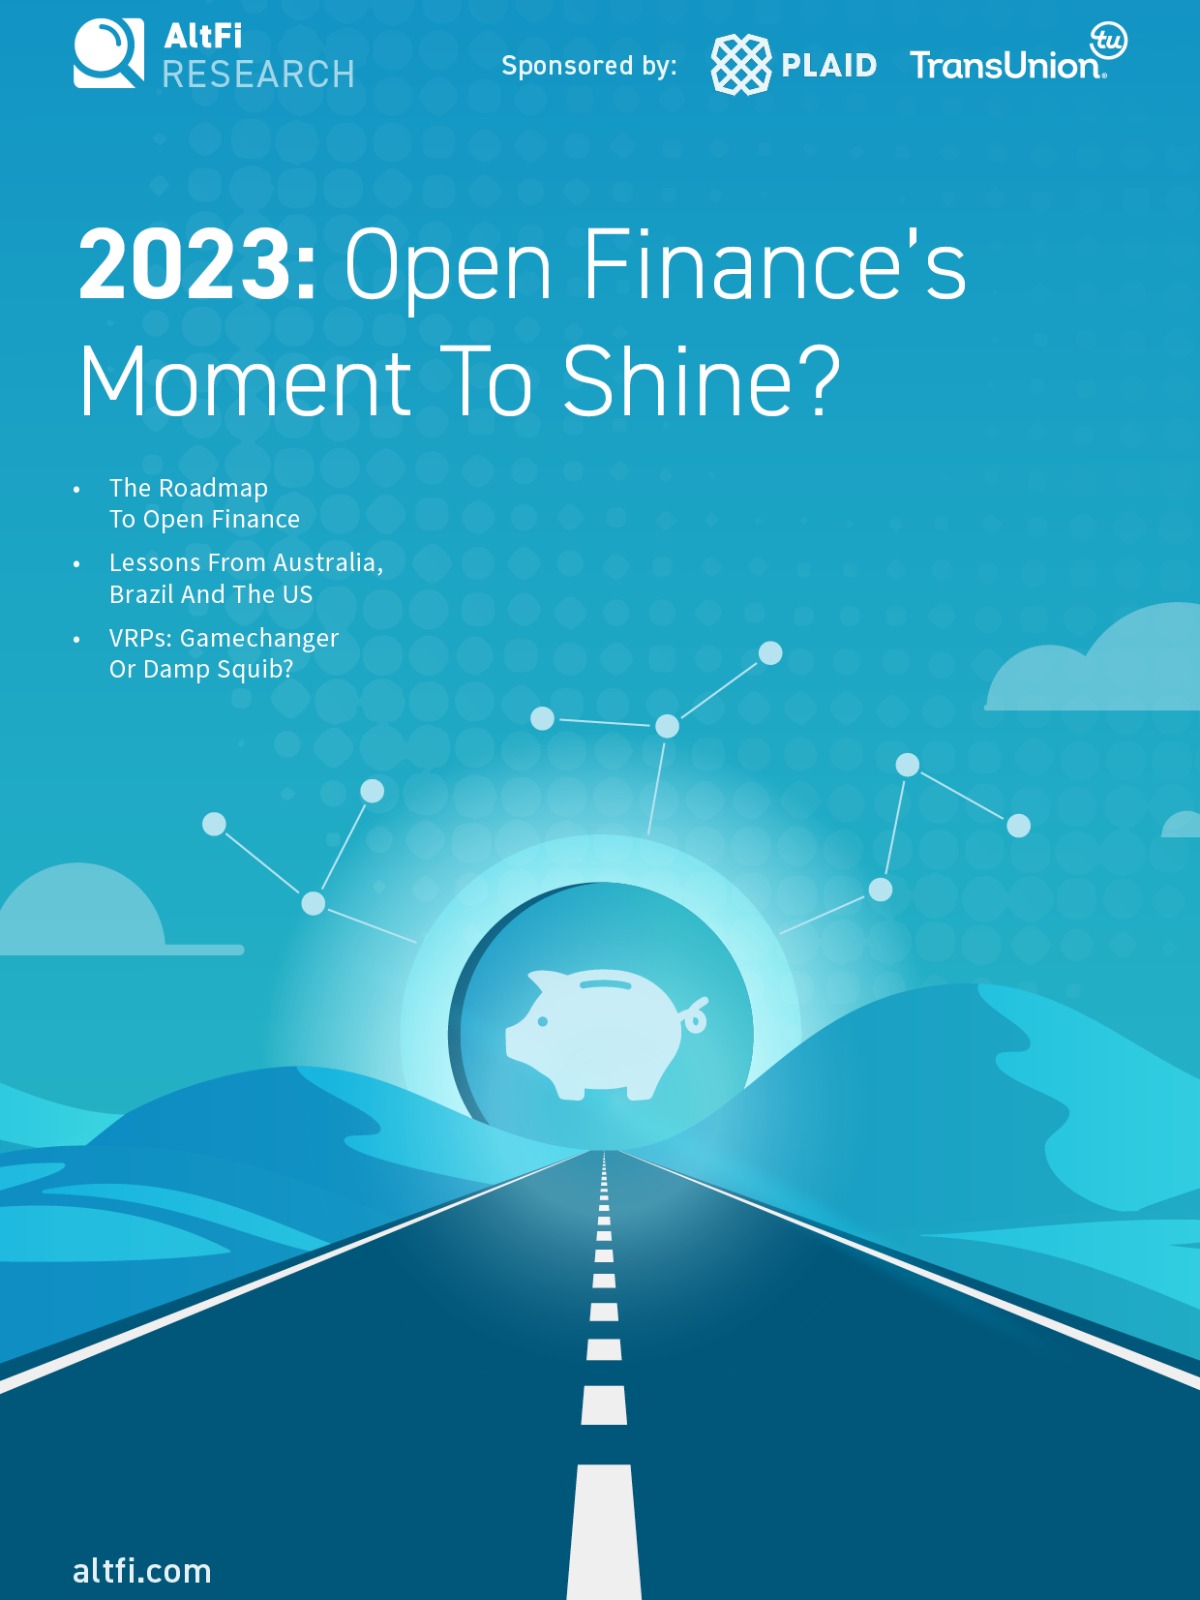 2023: Open Finance's Moment To Shine?